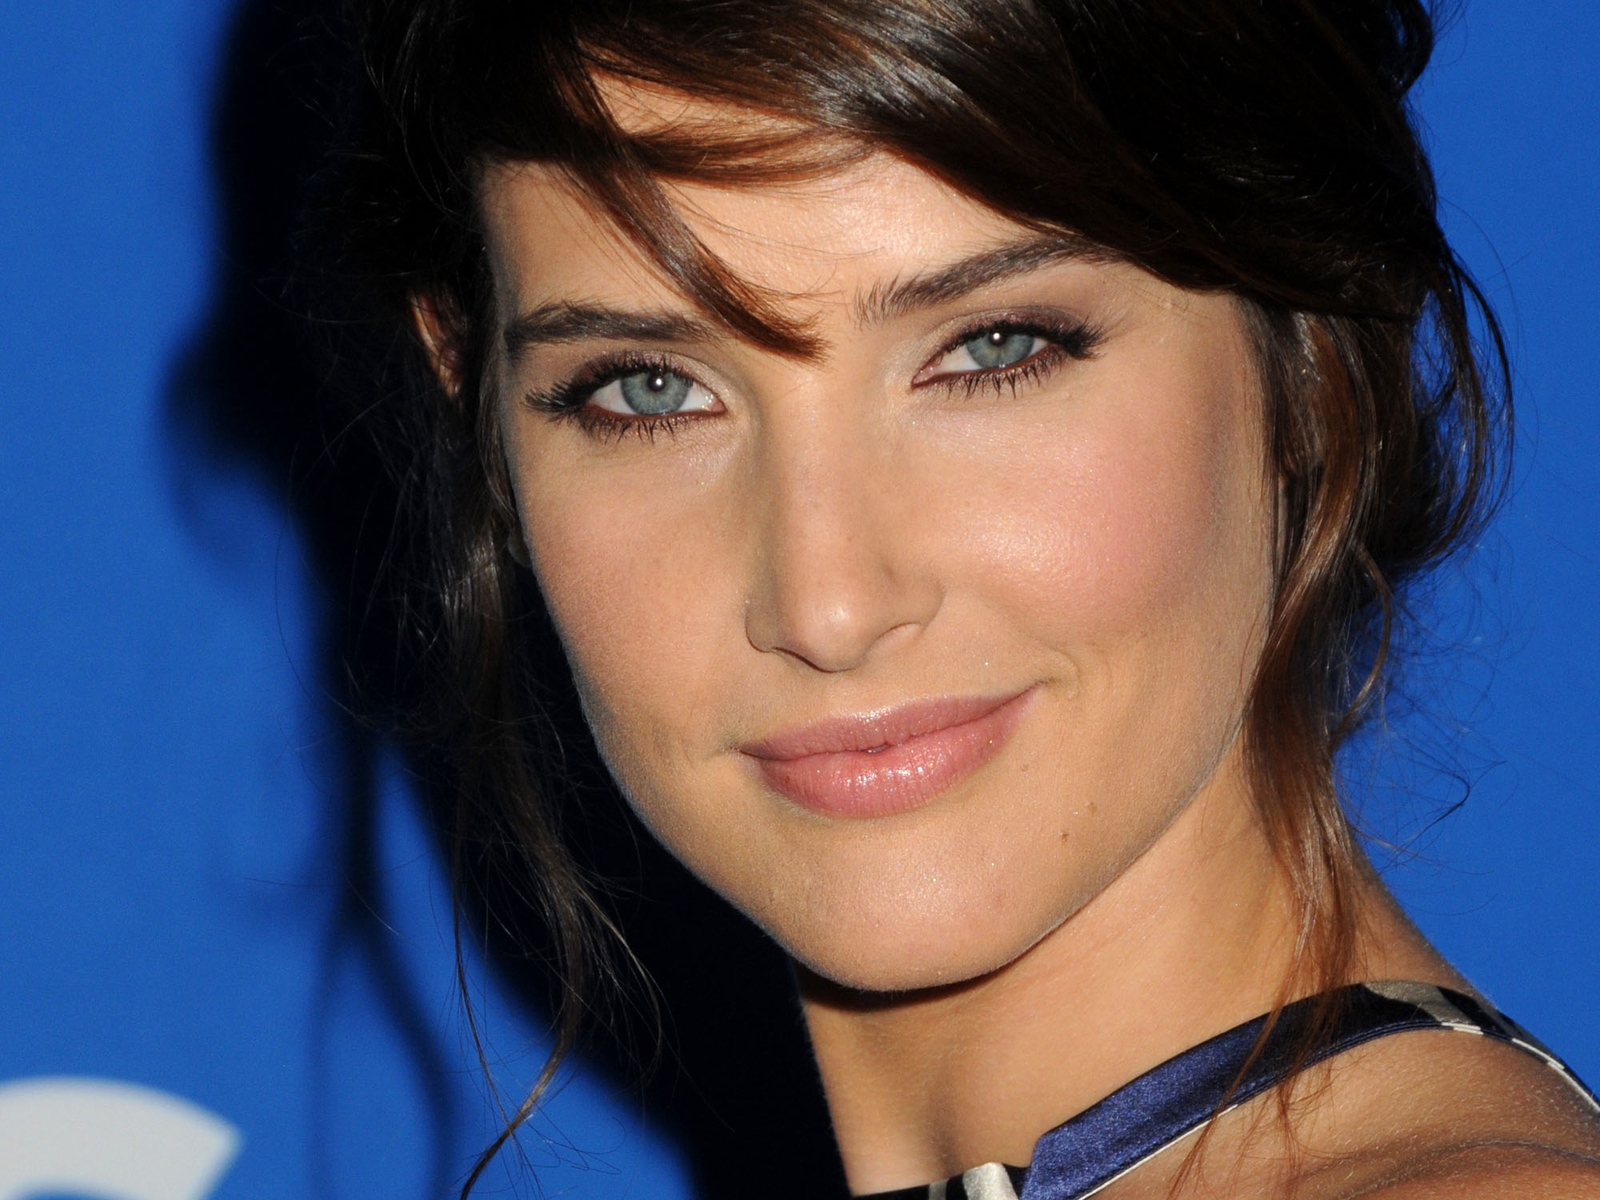 Cobie Smulders Smile for 1600 x 1200 resolution